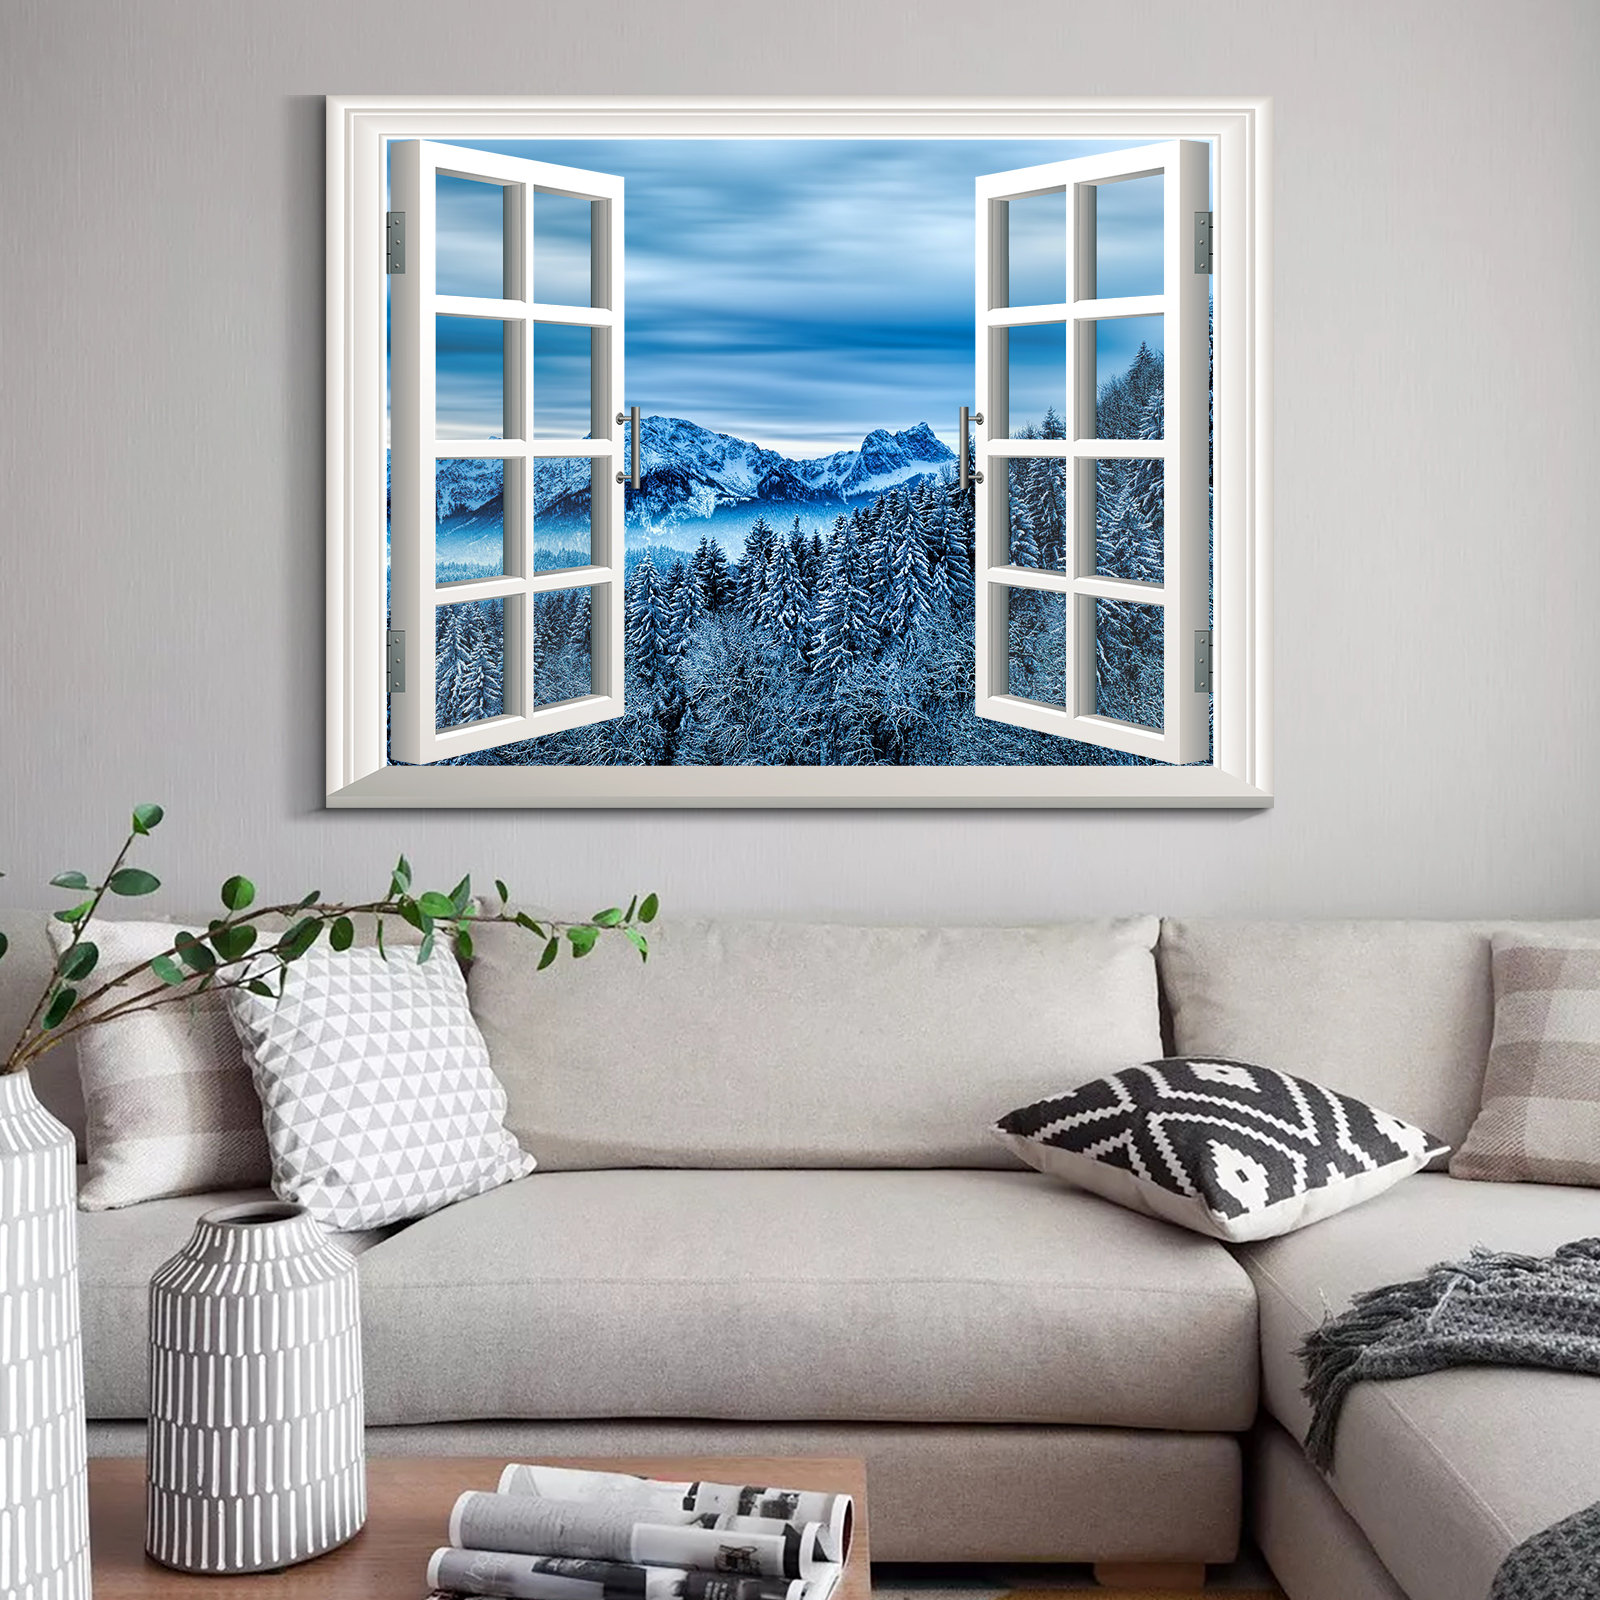 Millwood Pines Framed Canvas PRINTED Window Scene Landscape Snowy Forest And  Mountain Wall Art Decor Painting,Decoration For Office, Living Room,  Bathroom, Bedroom Decor-Ready To Hang On Canvas Painting